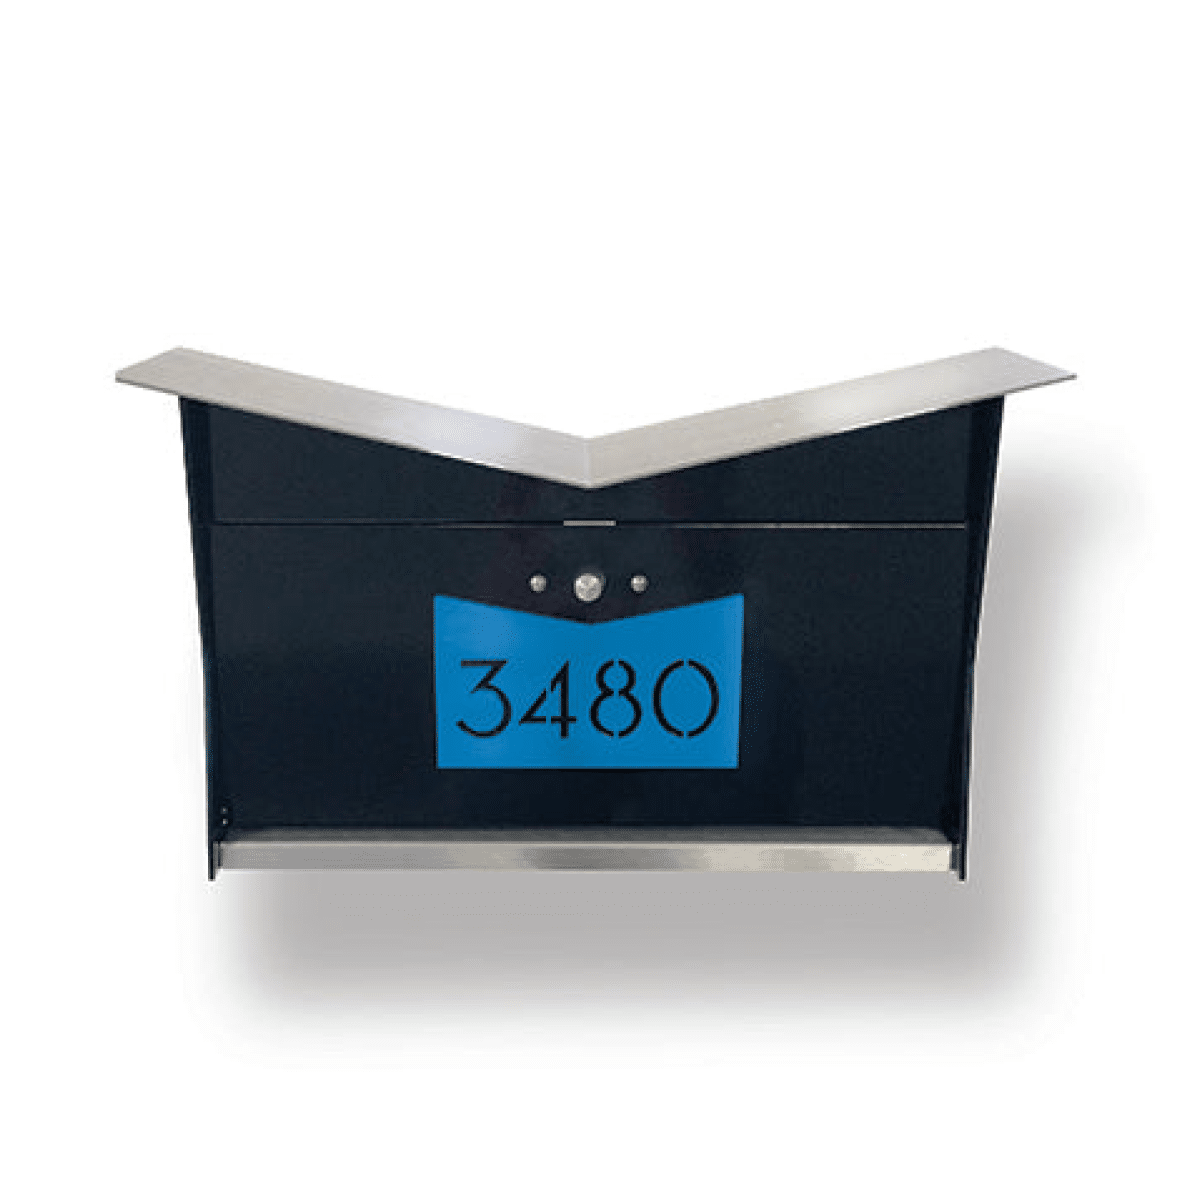 Butterfly Box in Jet Black – Wall Mount Mailbox Product Image